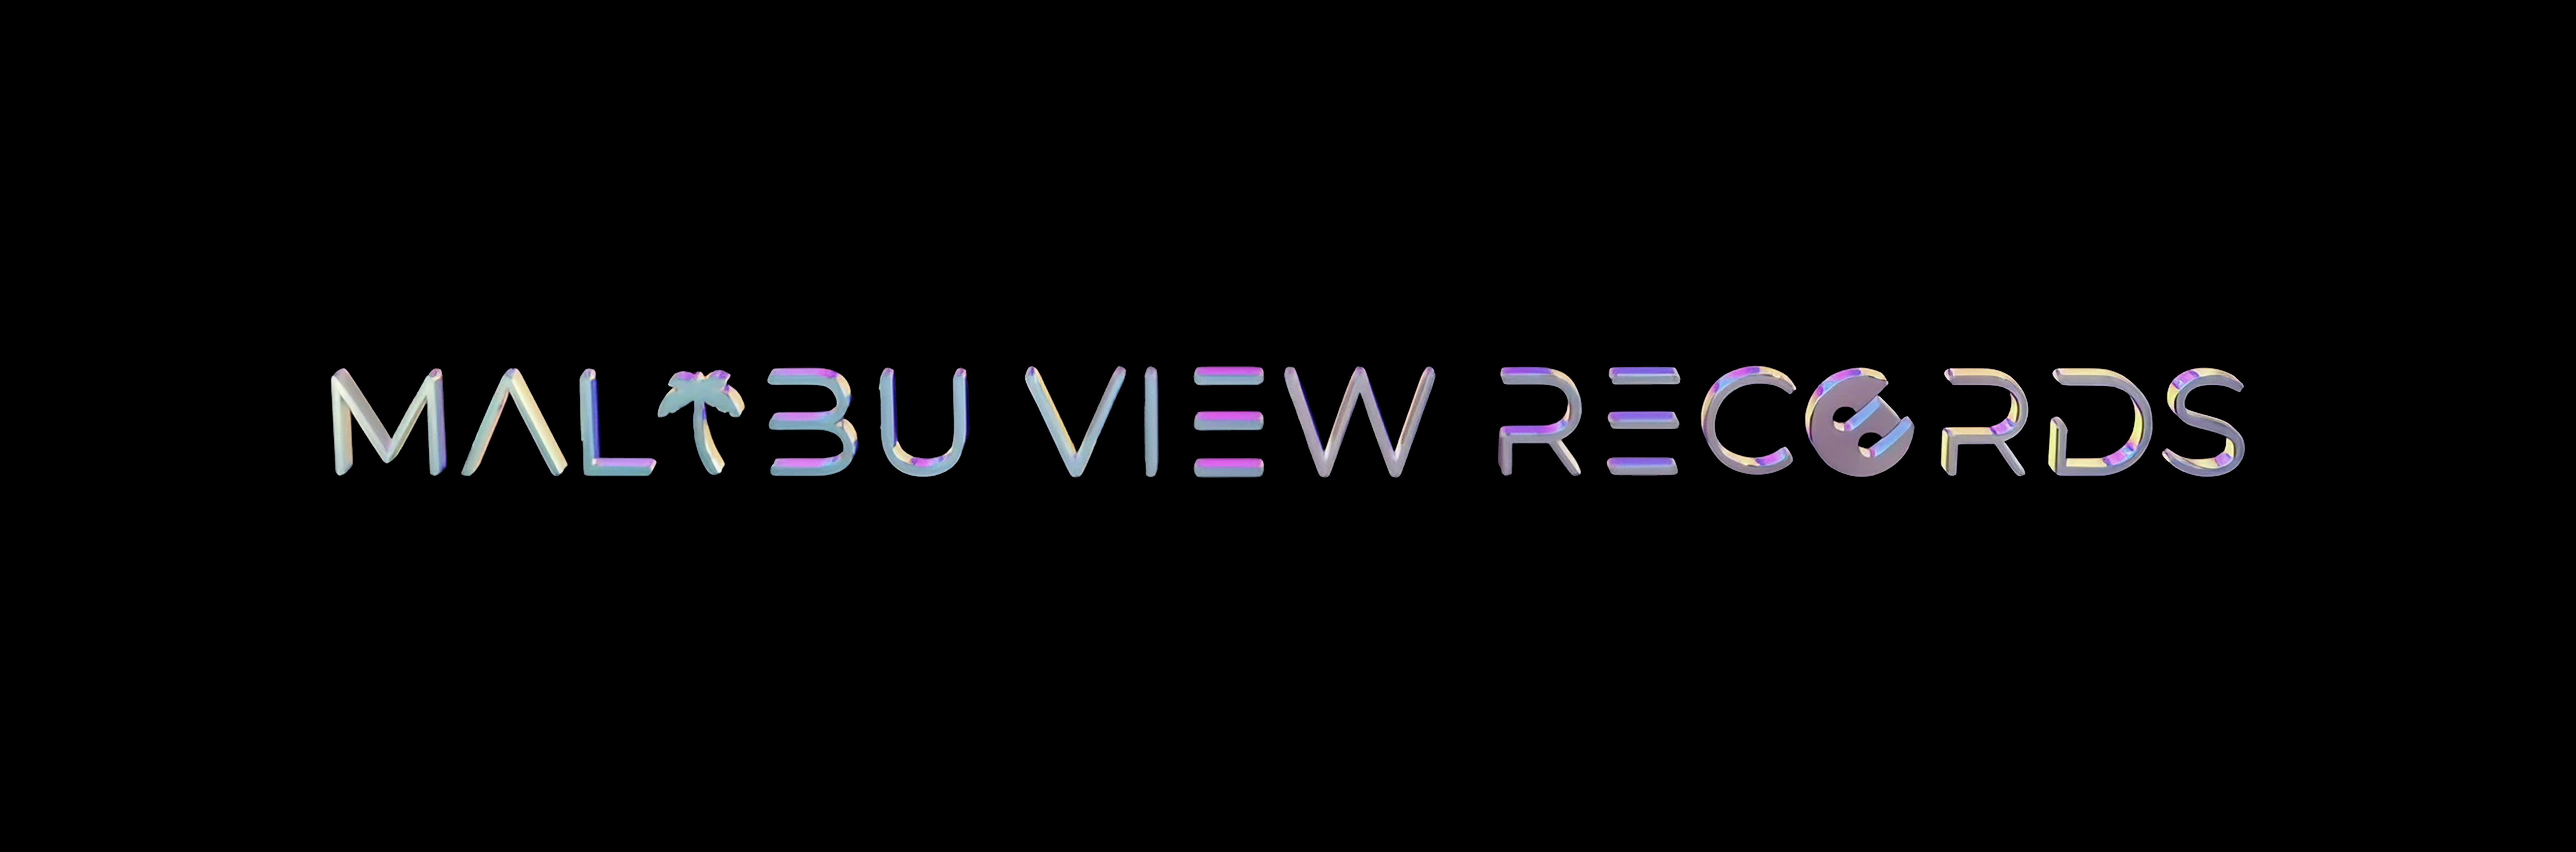 The logo for new indie record label Malibu View Records.